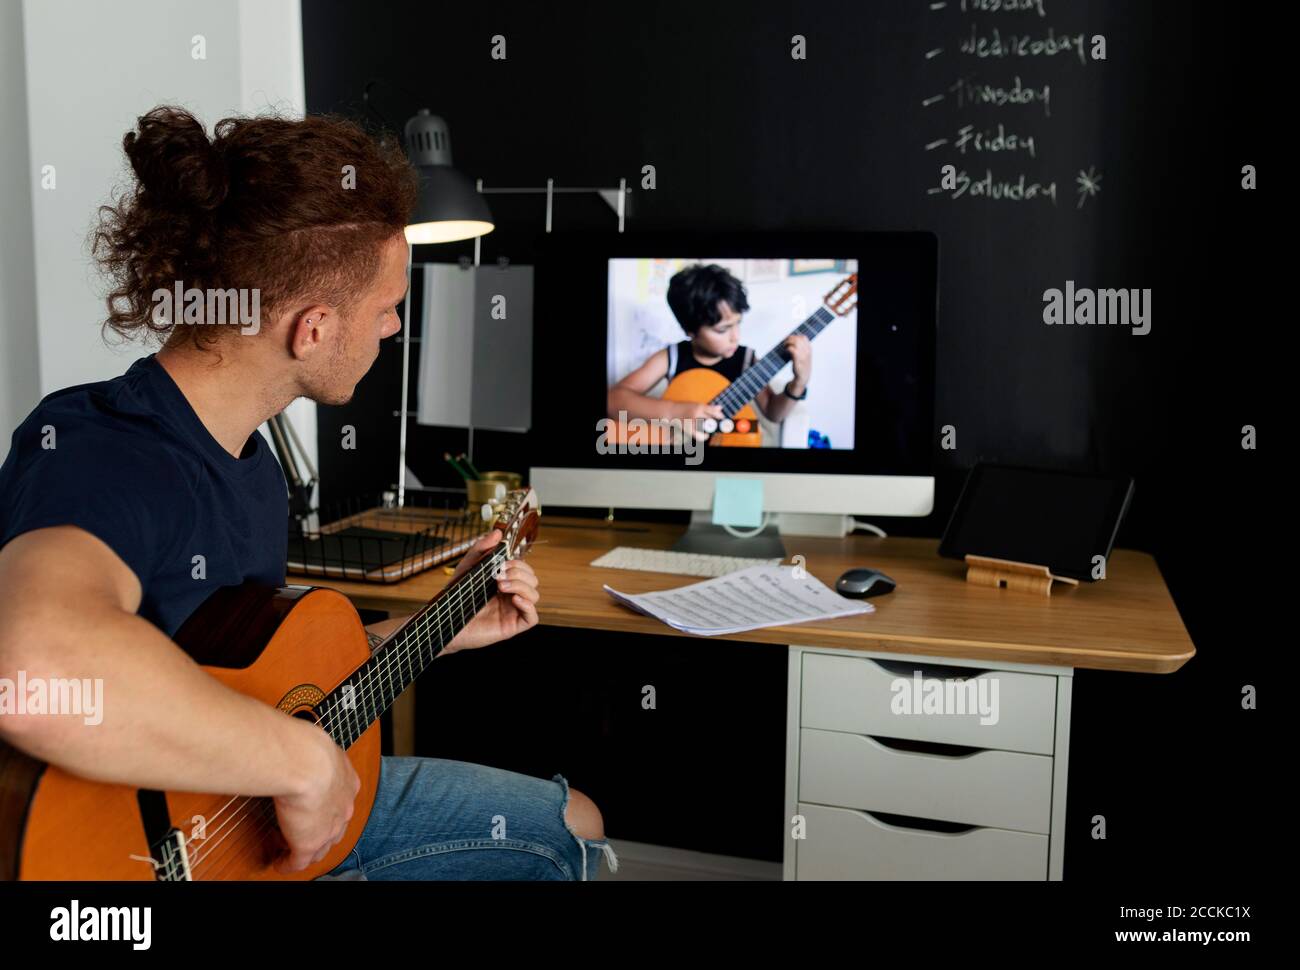 Man learning guitar while watching tutorial at home Stock Photo